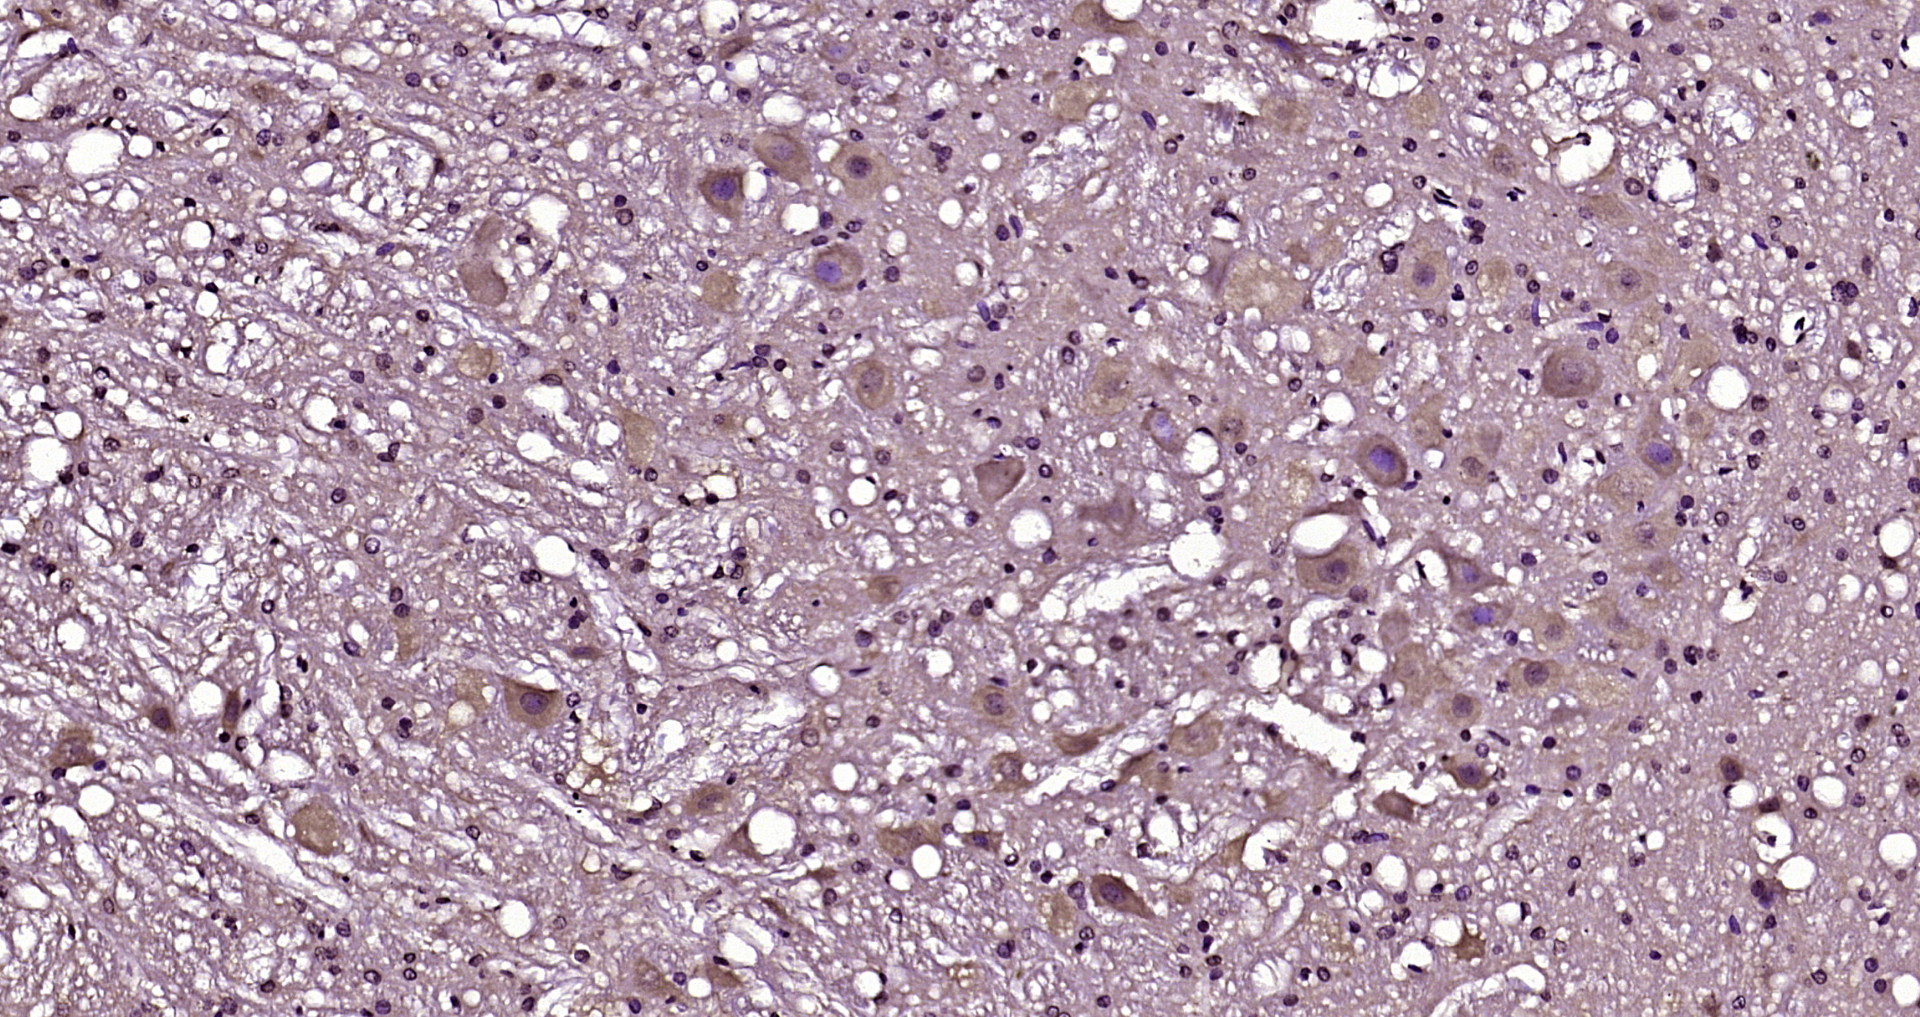 Paraformaldehyde-fixed, paraffin embedded Rat brain; Antigen retrieval by boiling in sodium citrate buffer (pH6.0) for 15min; Block endogenous peroxidase by 3% hydrogen peroxide for 20 minutes; Blocking buffer (normal goat serum) at 37°C for 30min; Antibody incubation with NCS1/Frequenin Polyclonal Antibody, Unconjugated (bs-11977R) at 1:200 overnight at 4°C, DAB staining.